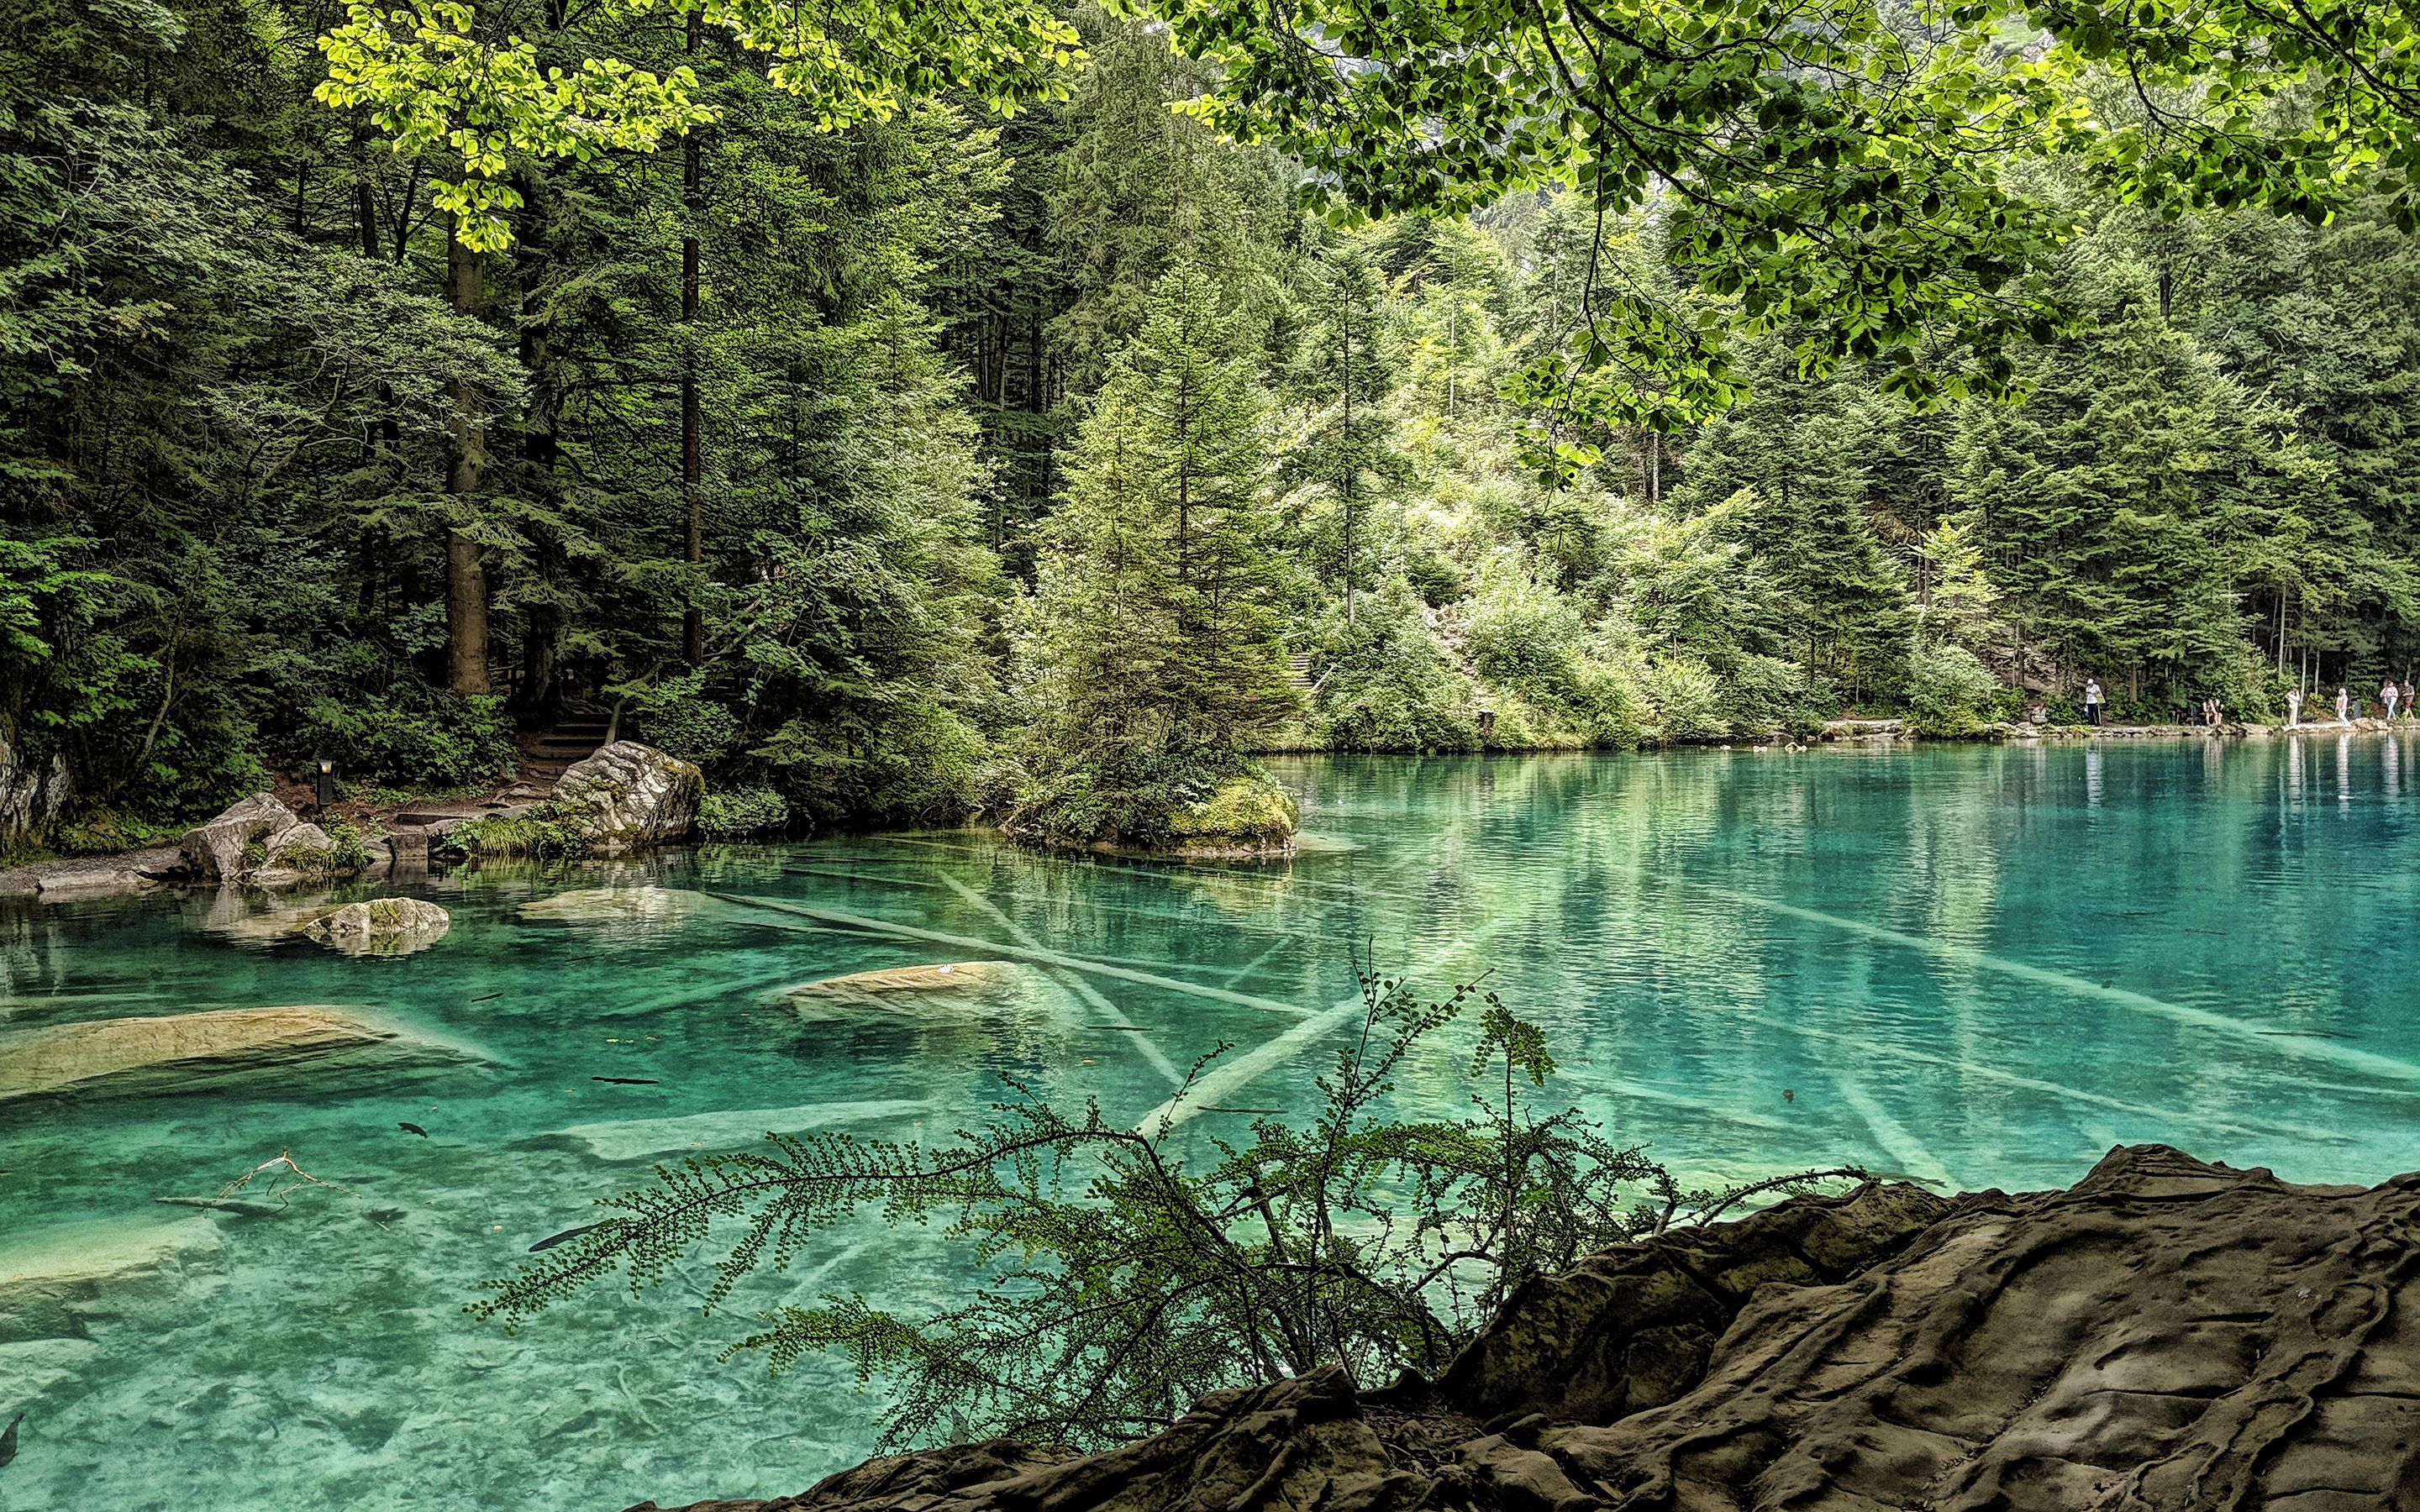 Blausee nature Park